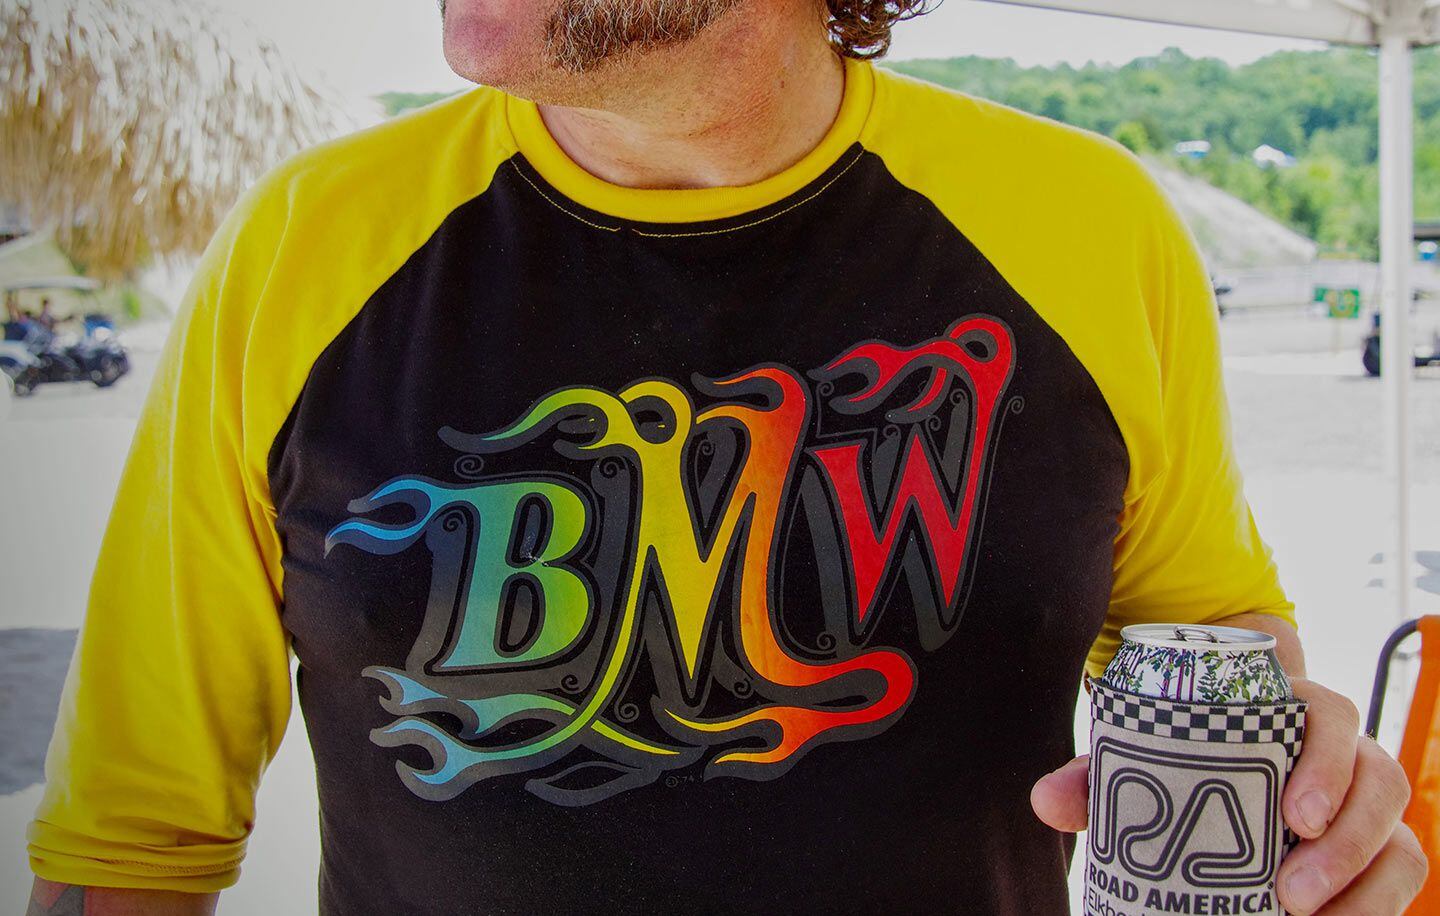 BMW riders love flames too. Andrew McCarthy modeling a new line of BMW-themed apparel.